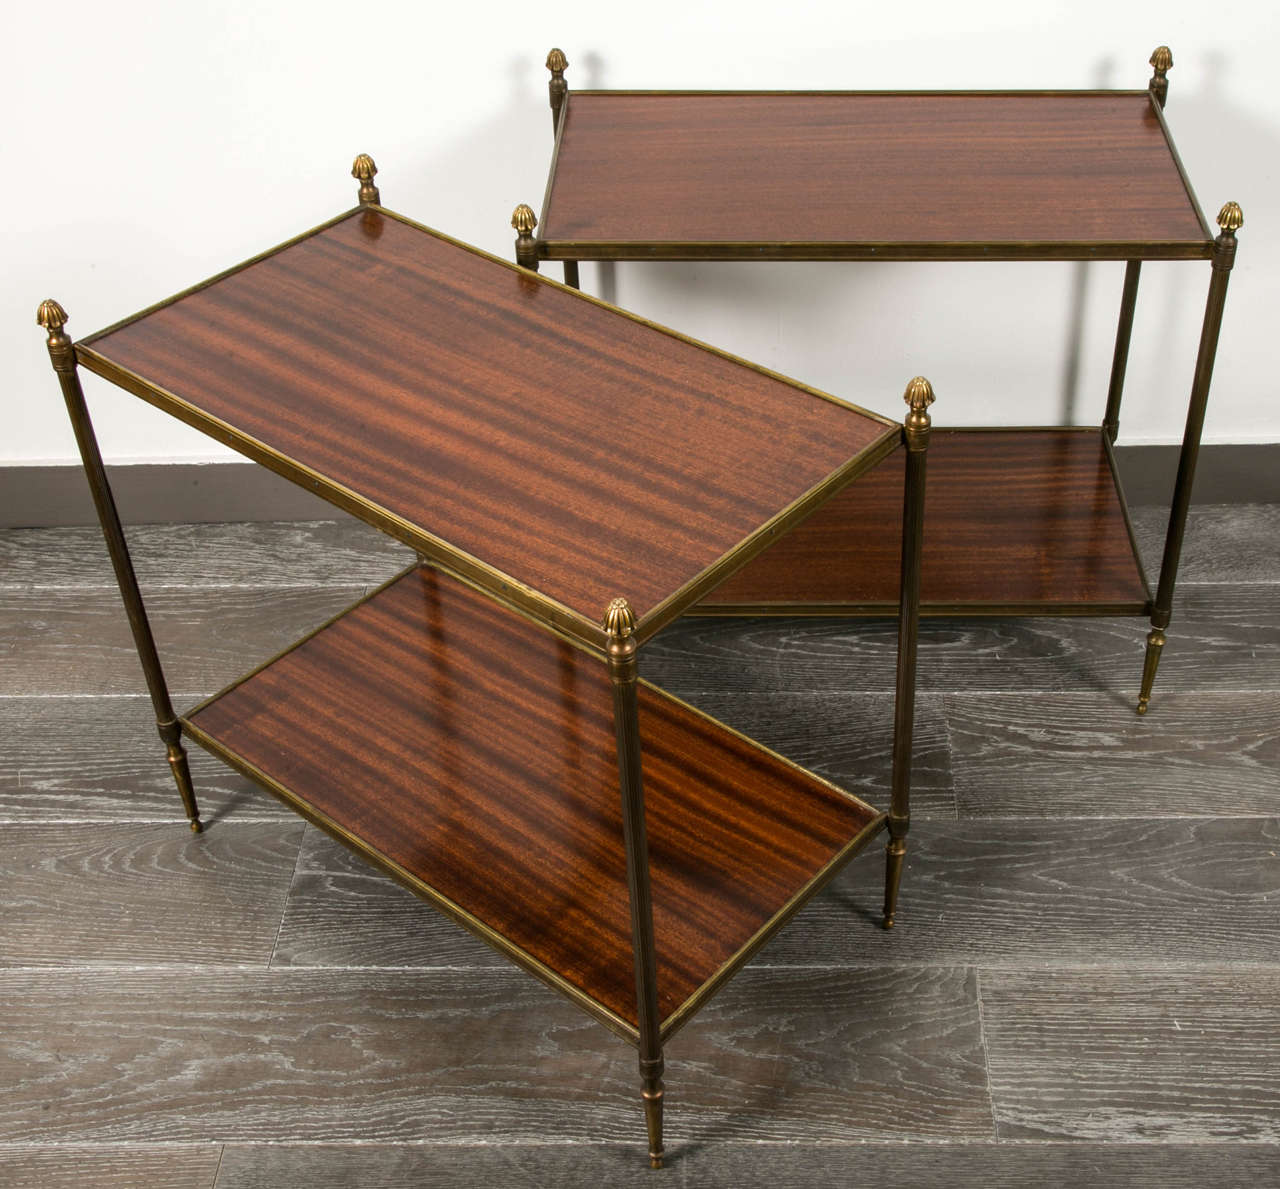 Pair of side tables, mahogany and brass,
circa 1960.